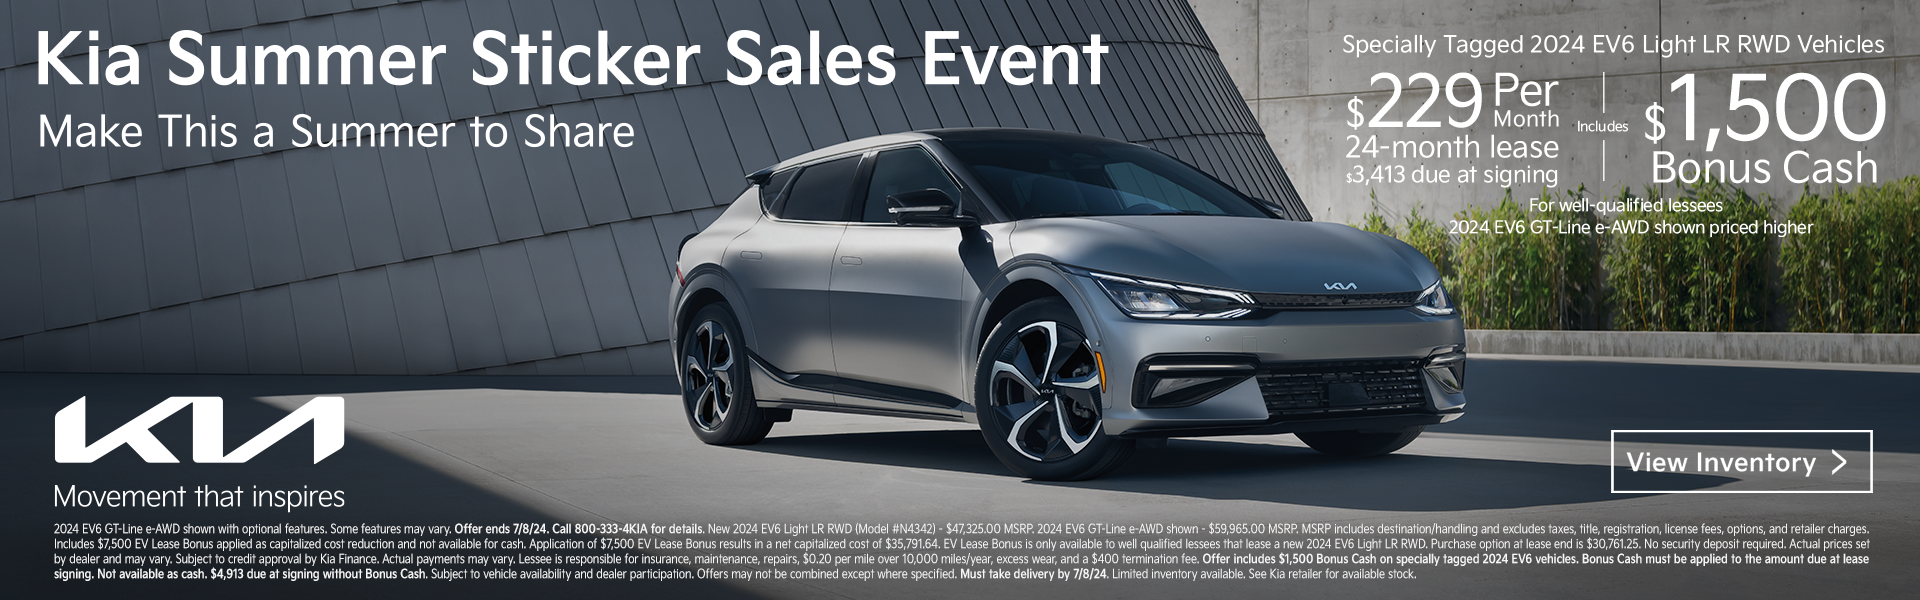 2024 Forte $229 Sticker Sales Event Lease Offer